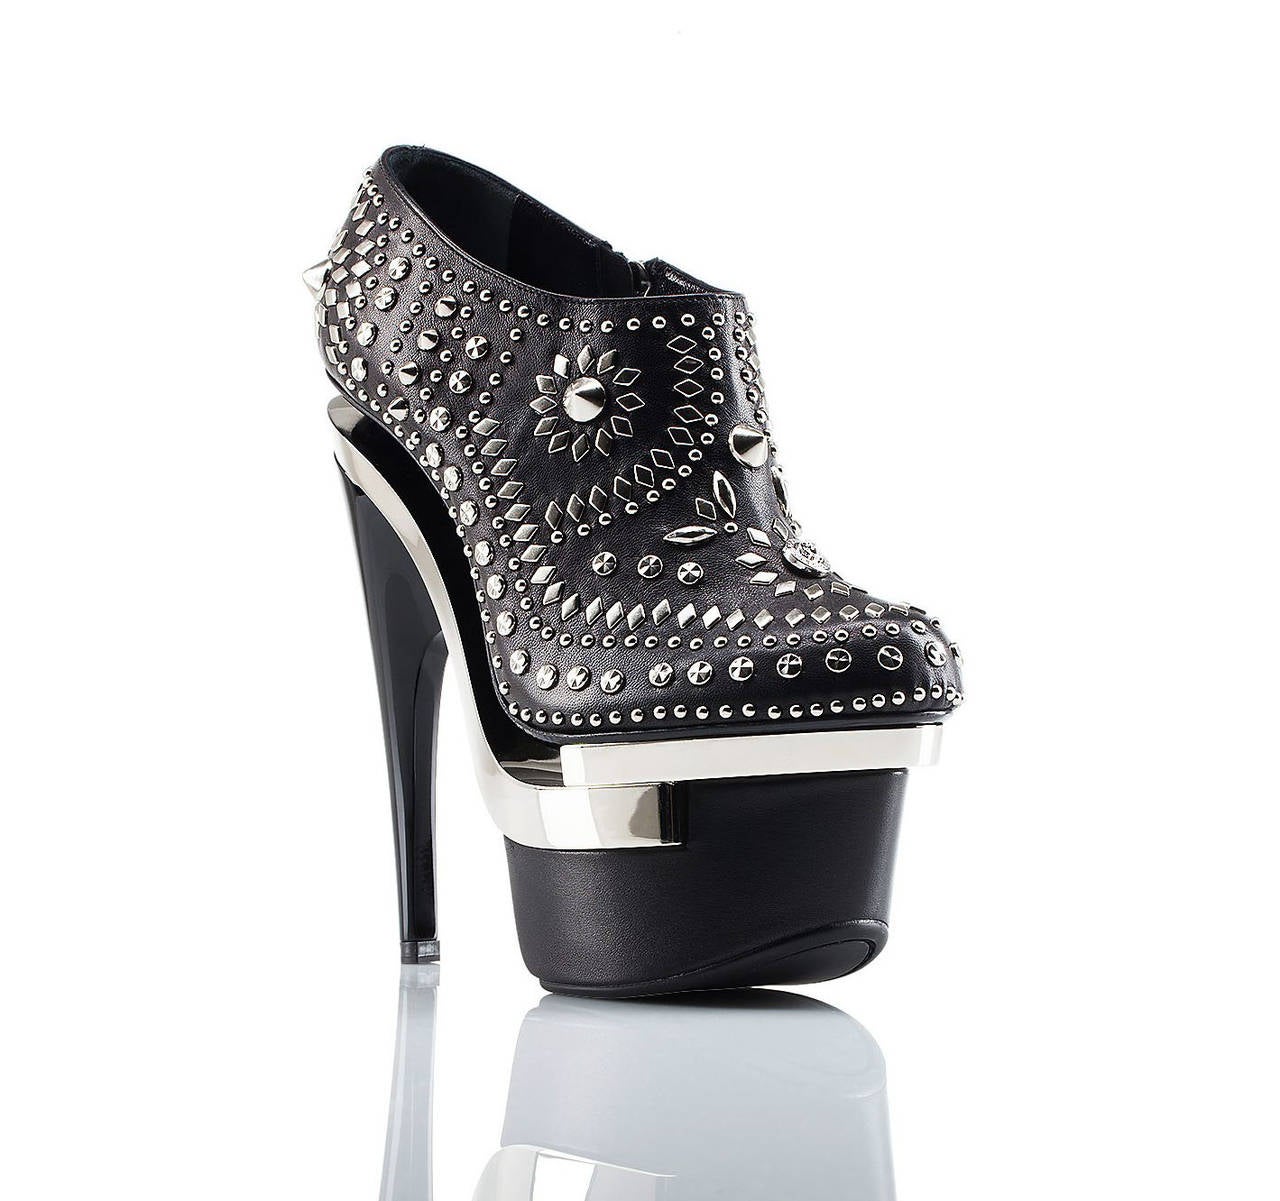 BRAND NEW

VERSACE BOOTS

Silver studded ankle booties with triple the drama. 

These Versace triple platform booties add sparkle and studs to your night out.

100% leather

Heel measures 6